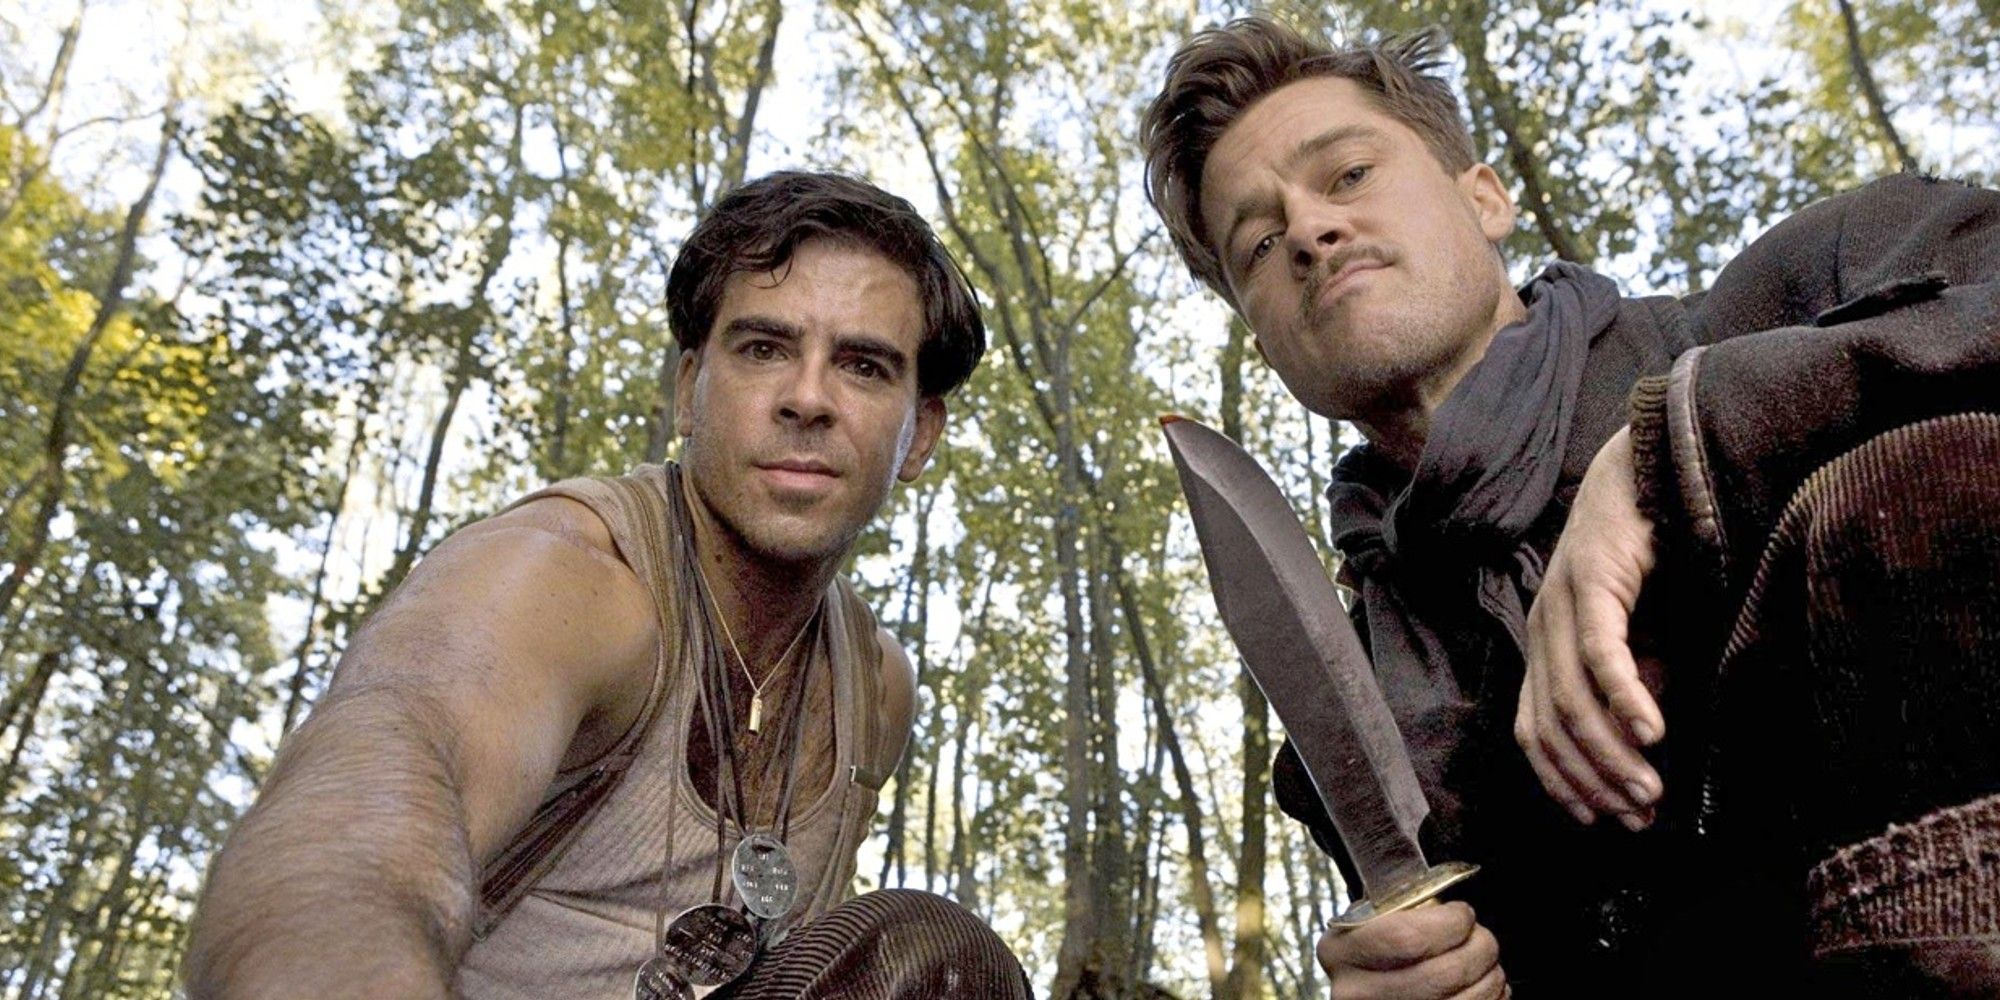 Brad Pitt and Zachary Quinto in 'Inglorious Basterds'